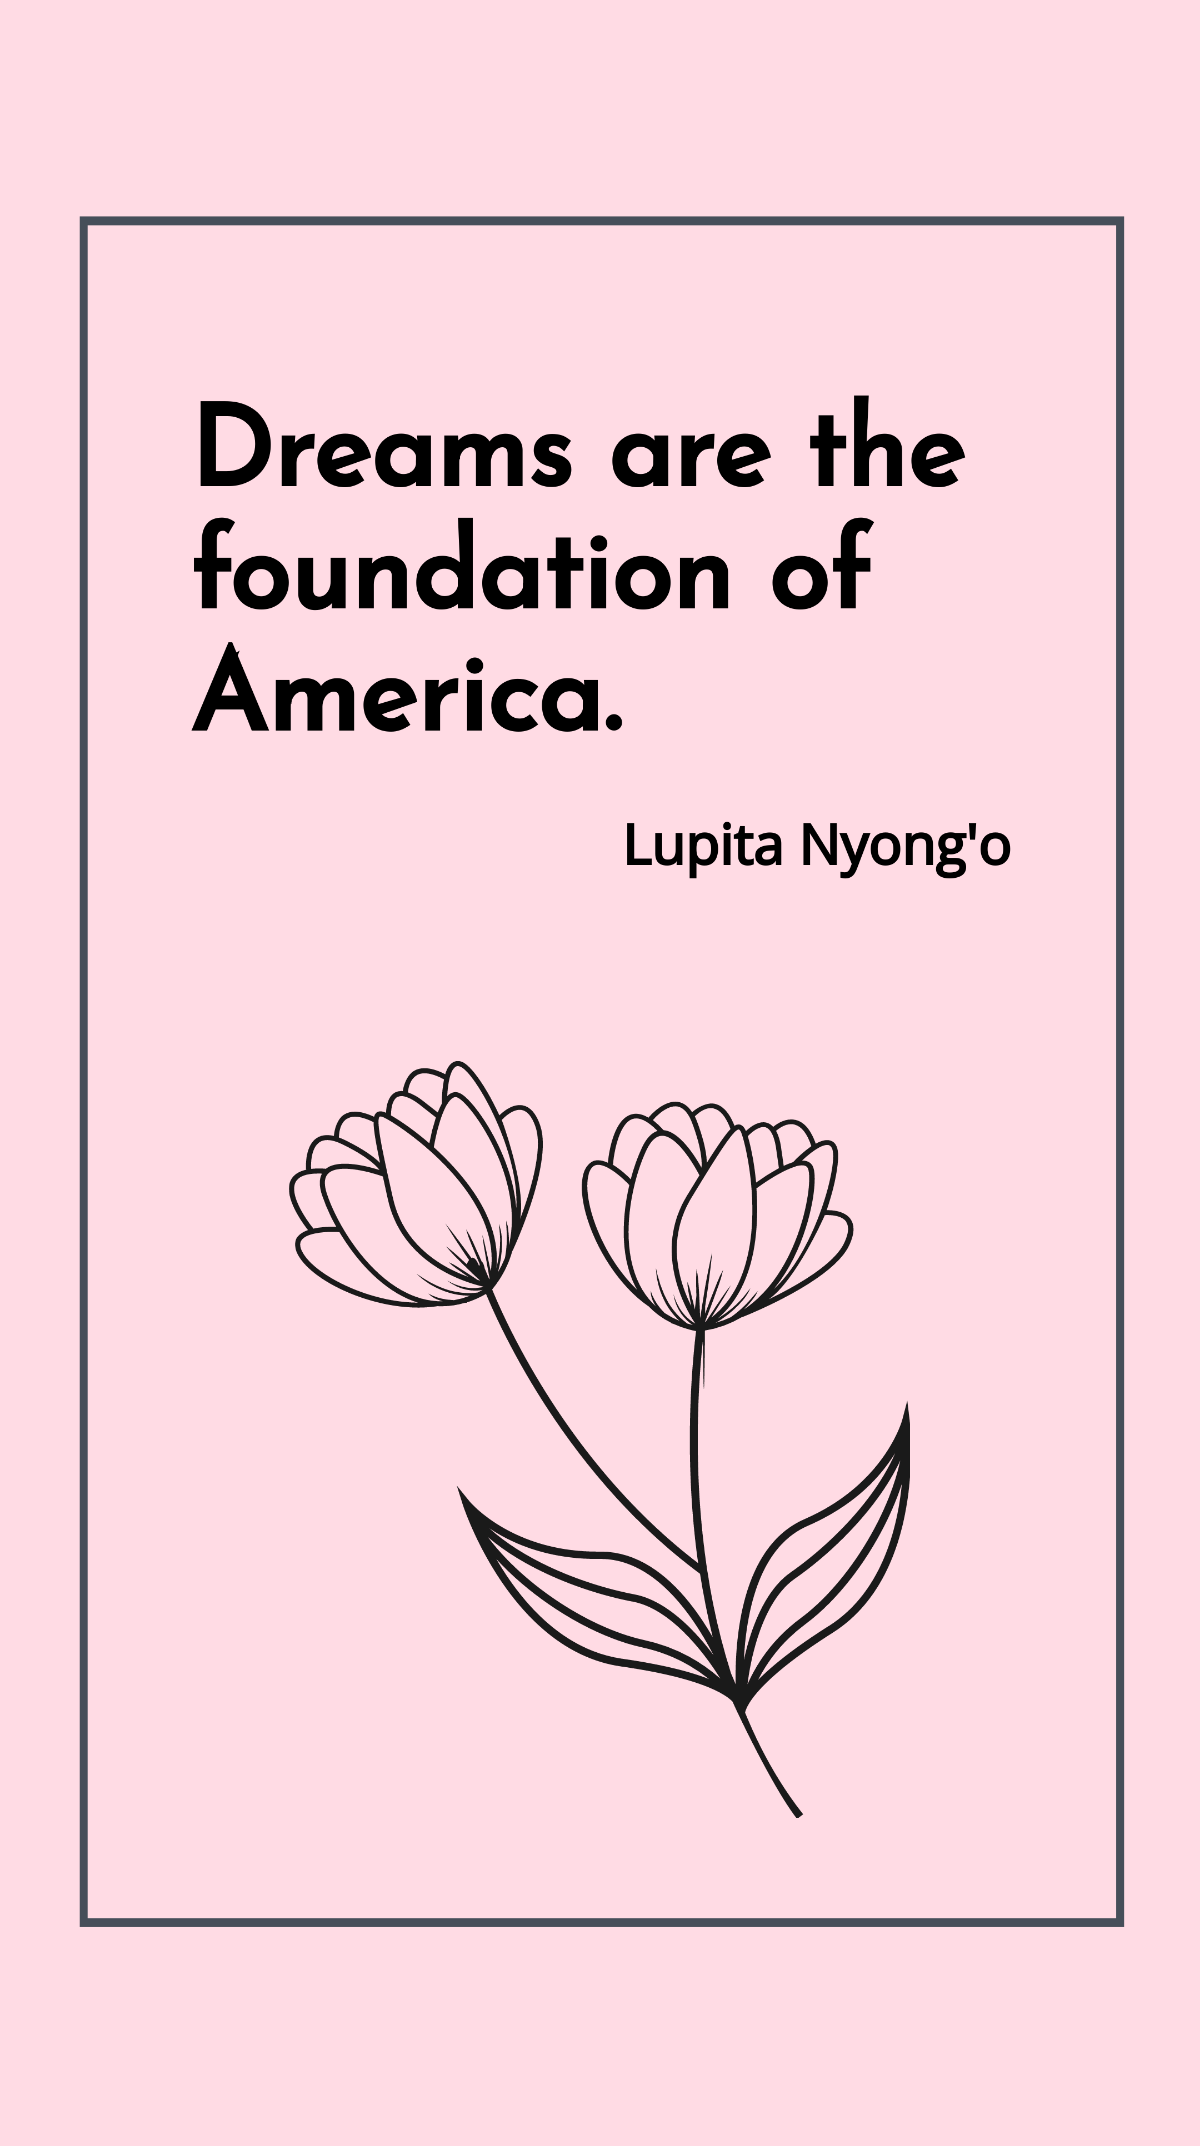 Lupita Nyong'o - Dreams are the foundation of America. Template